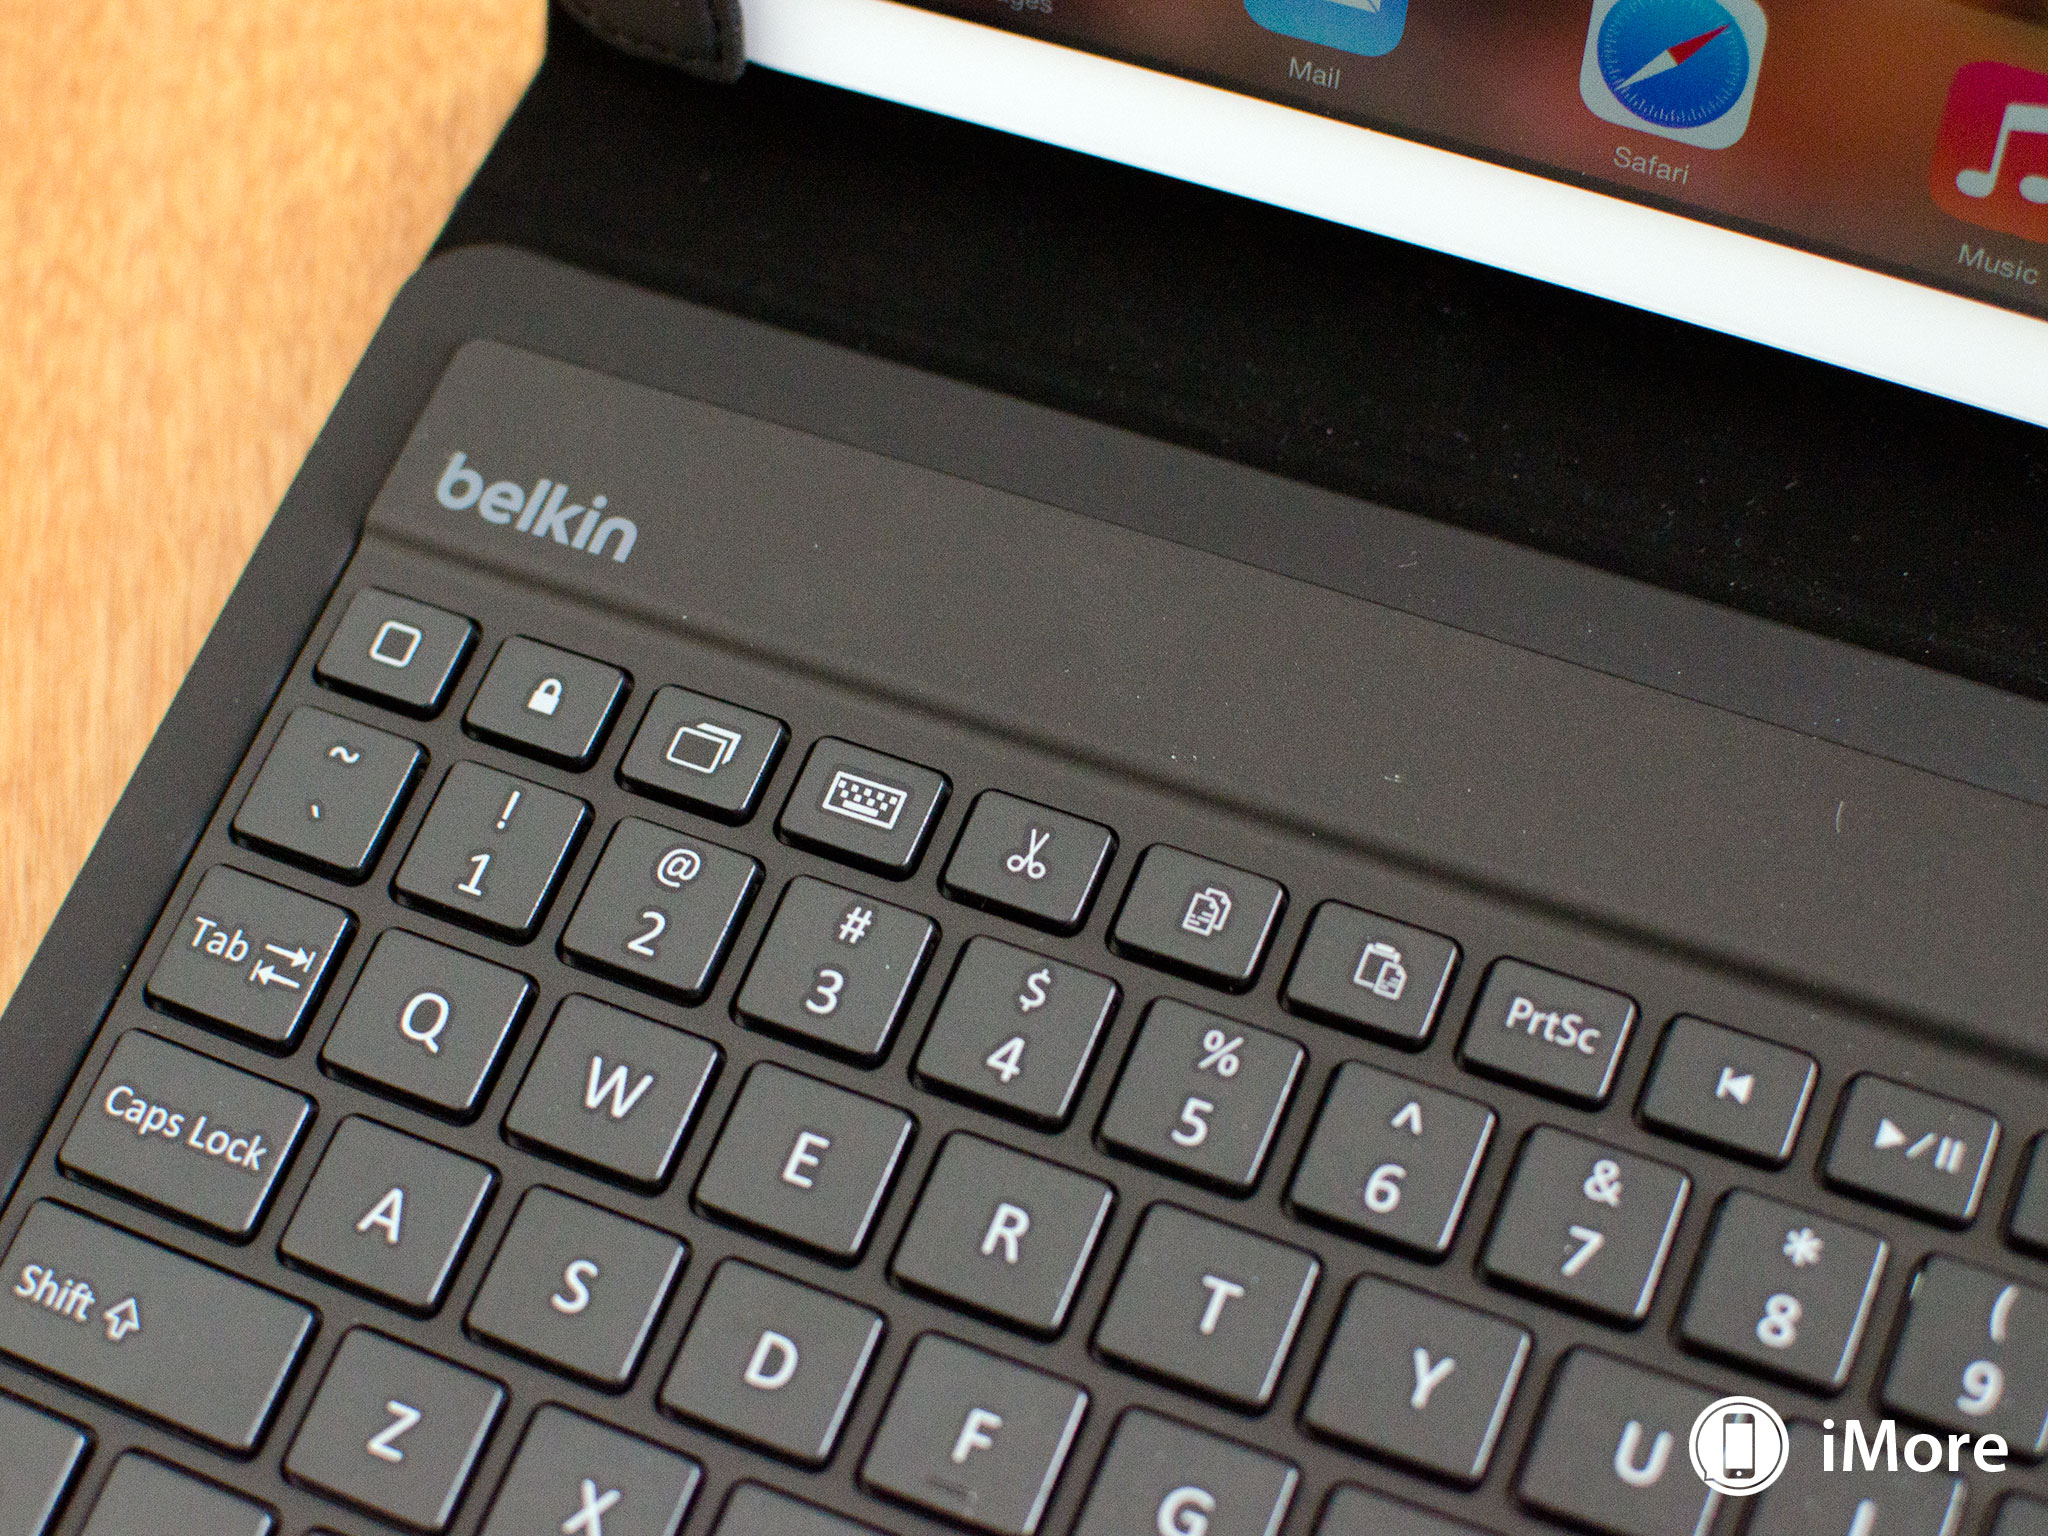 QODE Belkin Slim Style Keyboard Case for iPad Air review